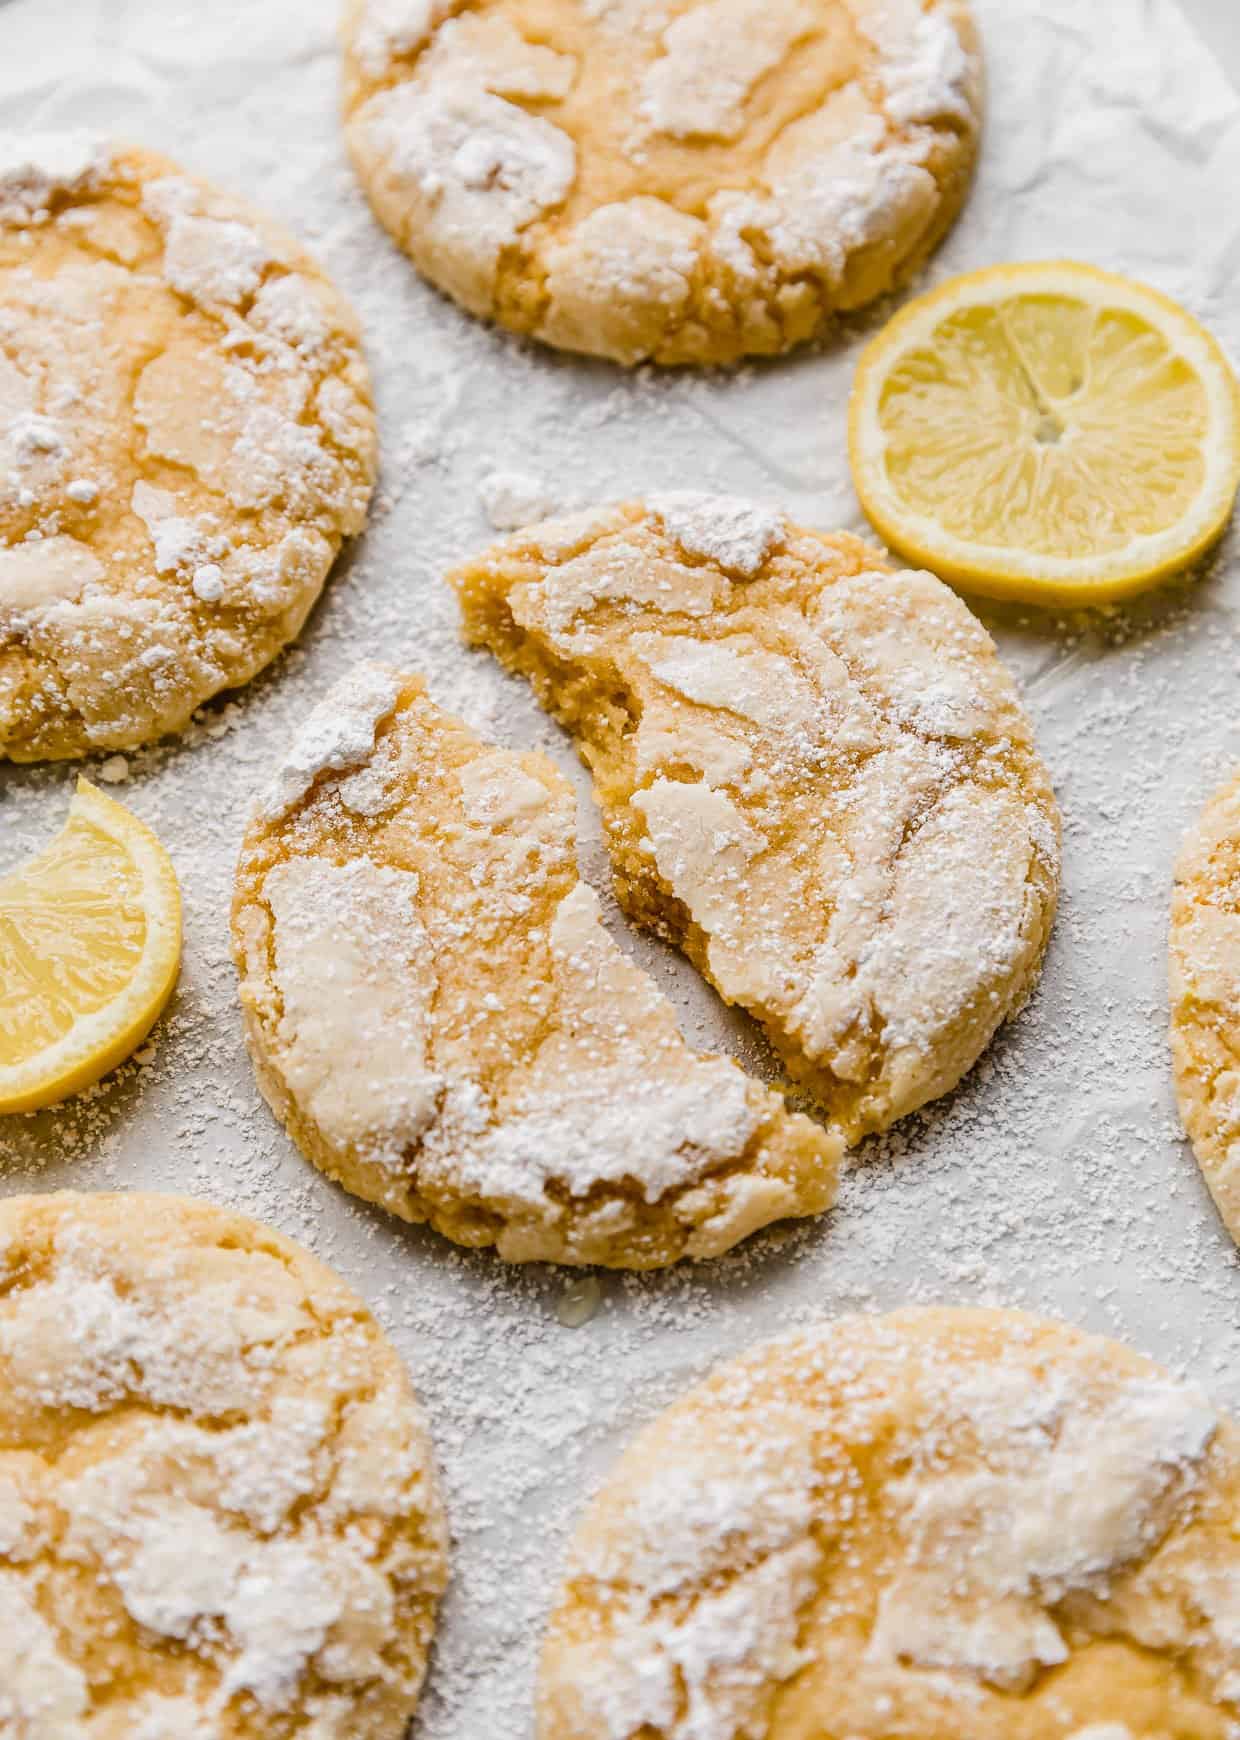 A Lemon Crinkle Cookie torn in half, on a white background with lemon slices around the cookie.